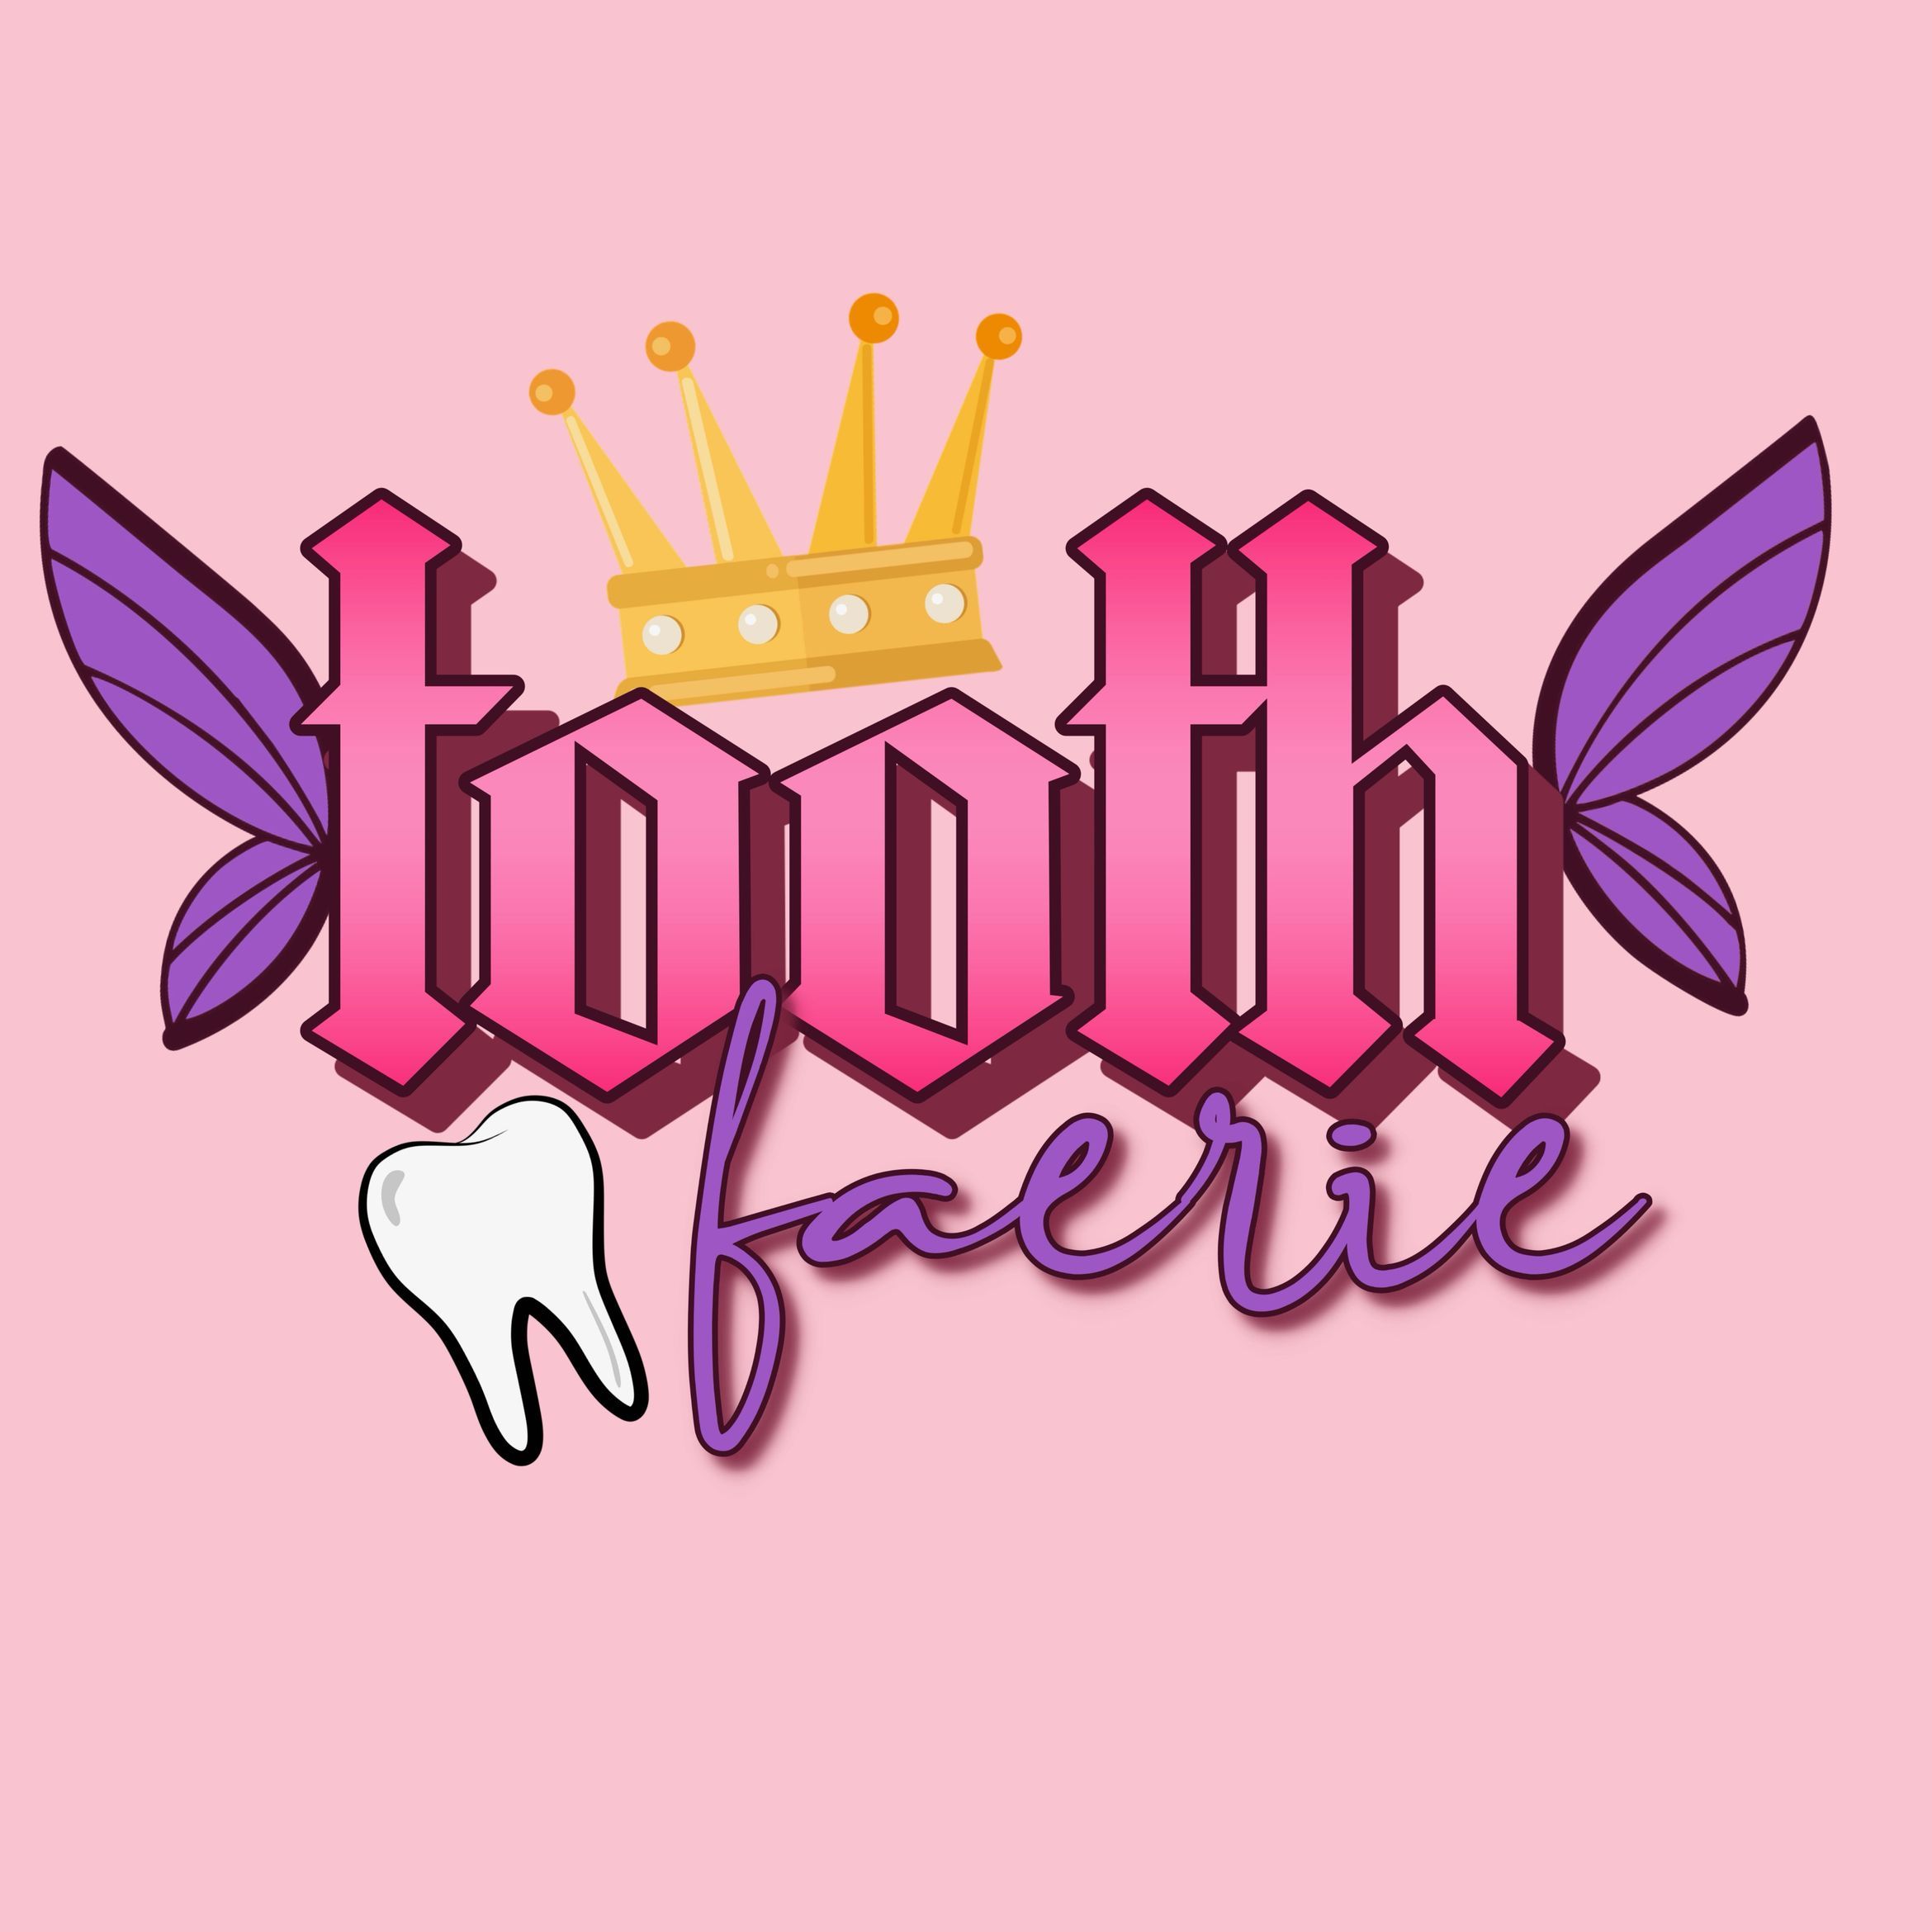 Tooth Faerie, 2138 S Indiana Ave, Chicago, 60616